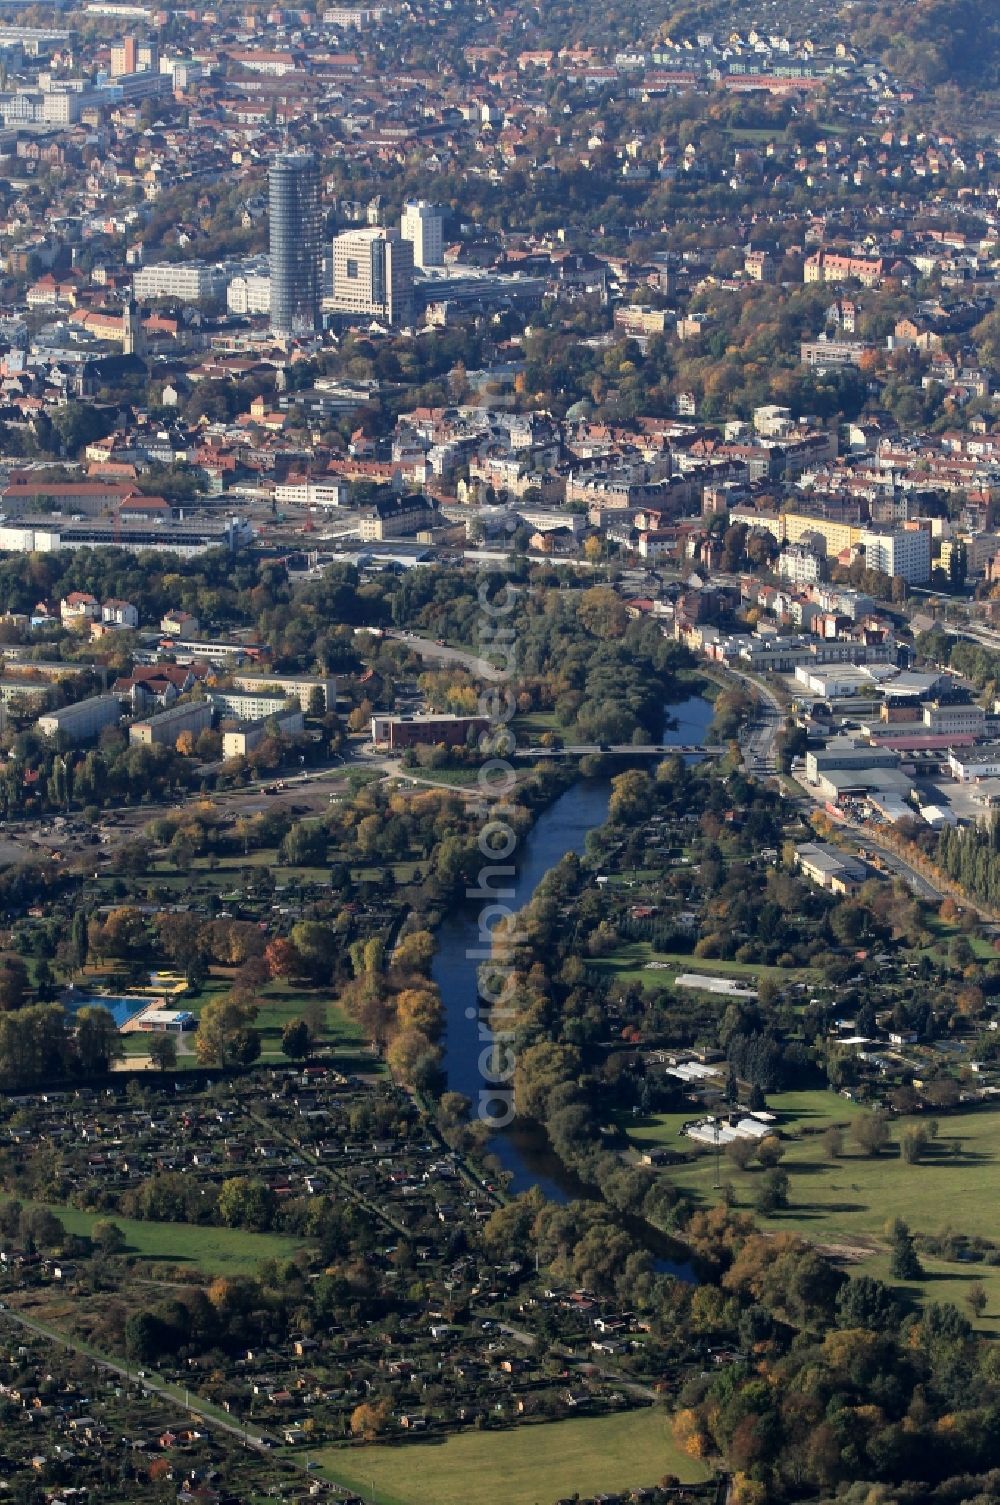 Aerial photograph Jena - View from district Zwaetzen of the town Jena with the river Saale and the city center with the tower Jentower in Thuringia